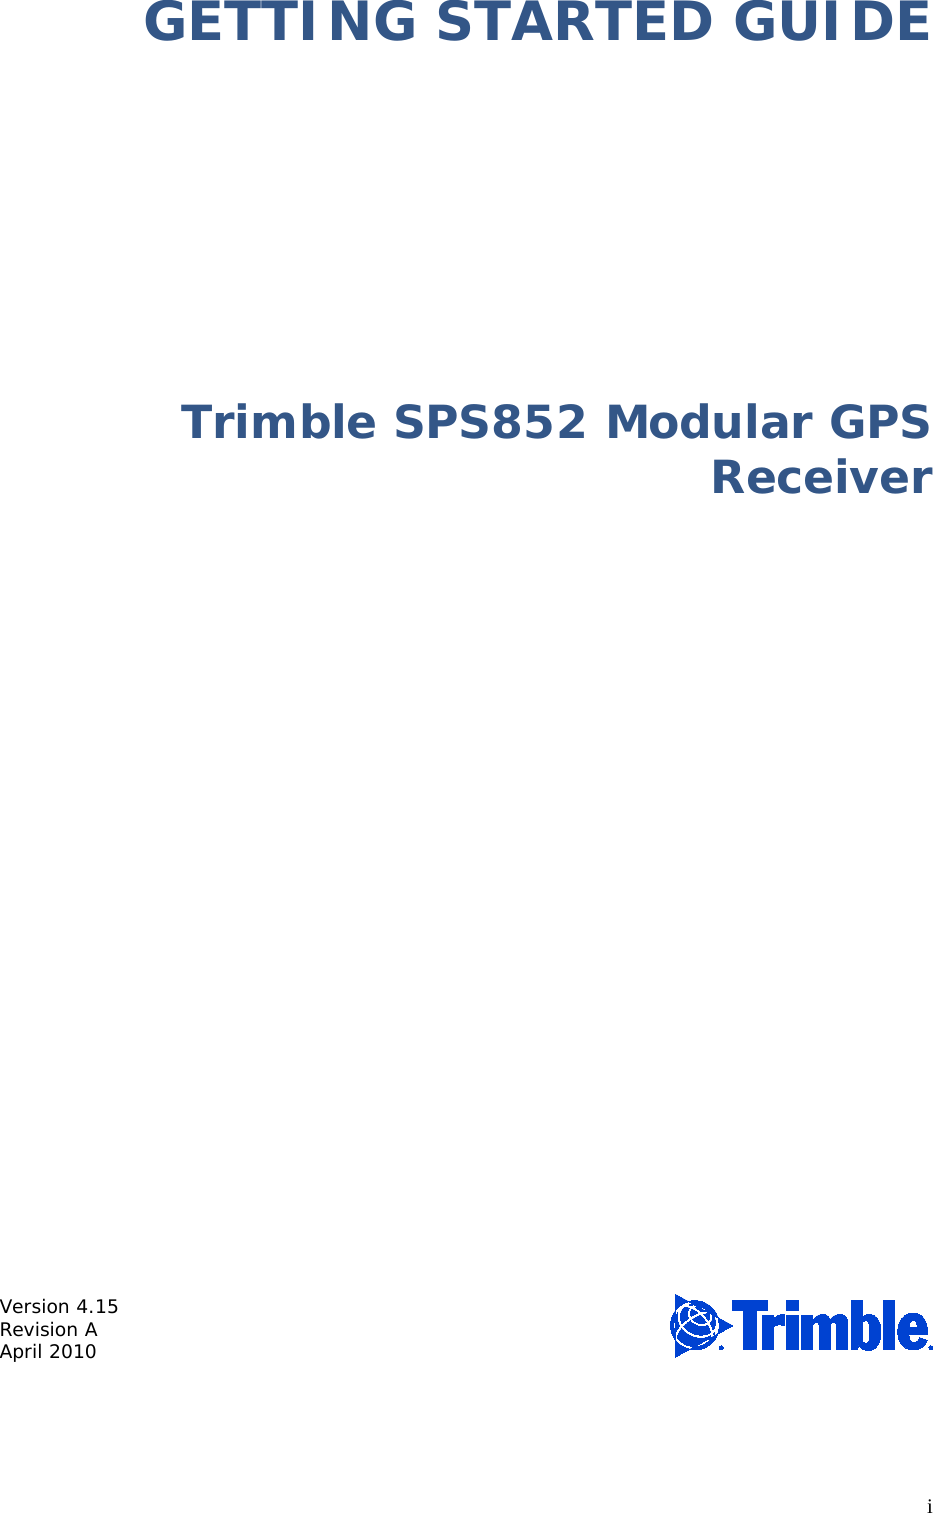 i GETTING STARTED GUIDE  Trimble SPS852 Modular GPS Receiver                      Version 4.15  Revision A April 2010 